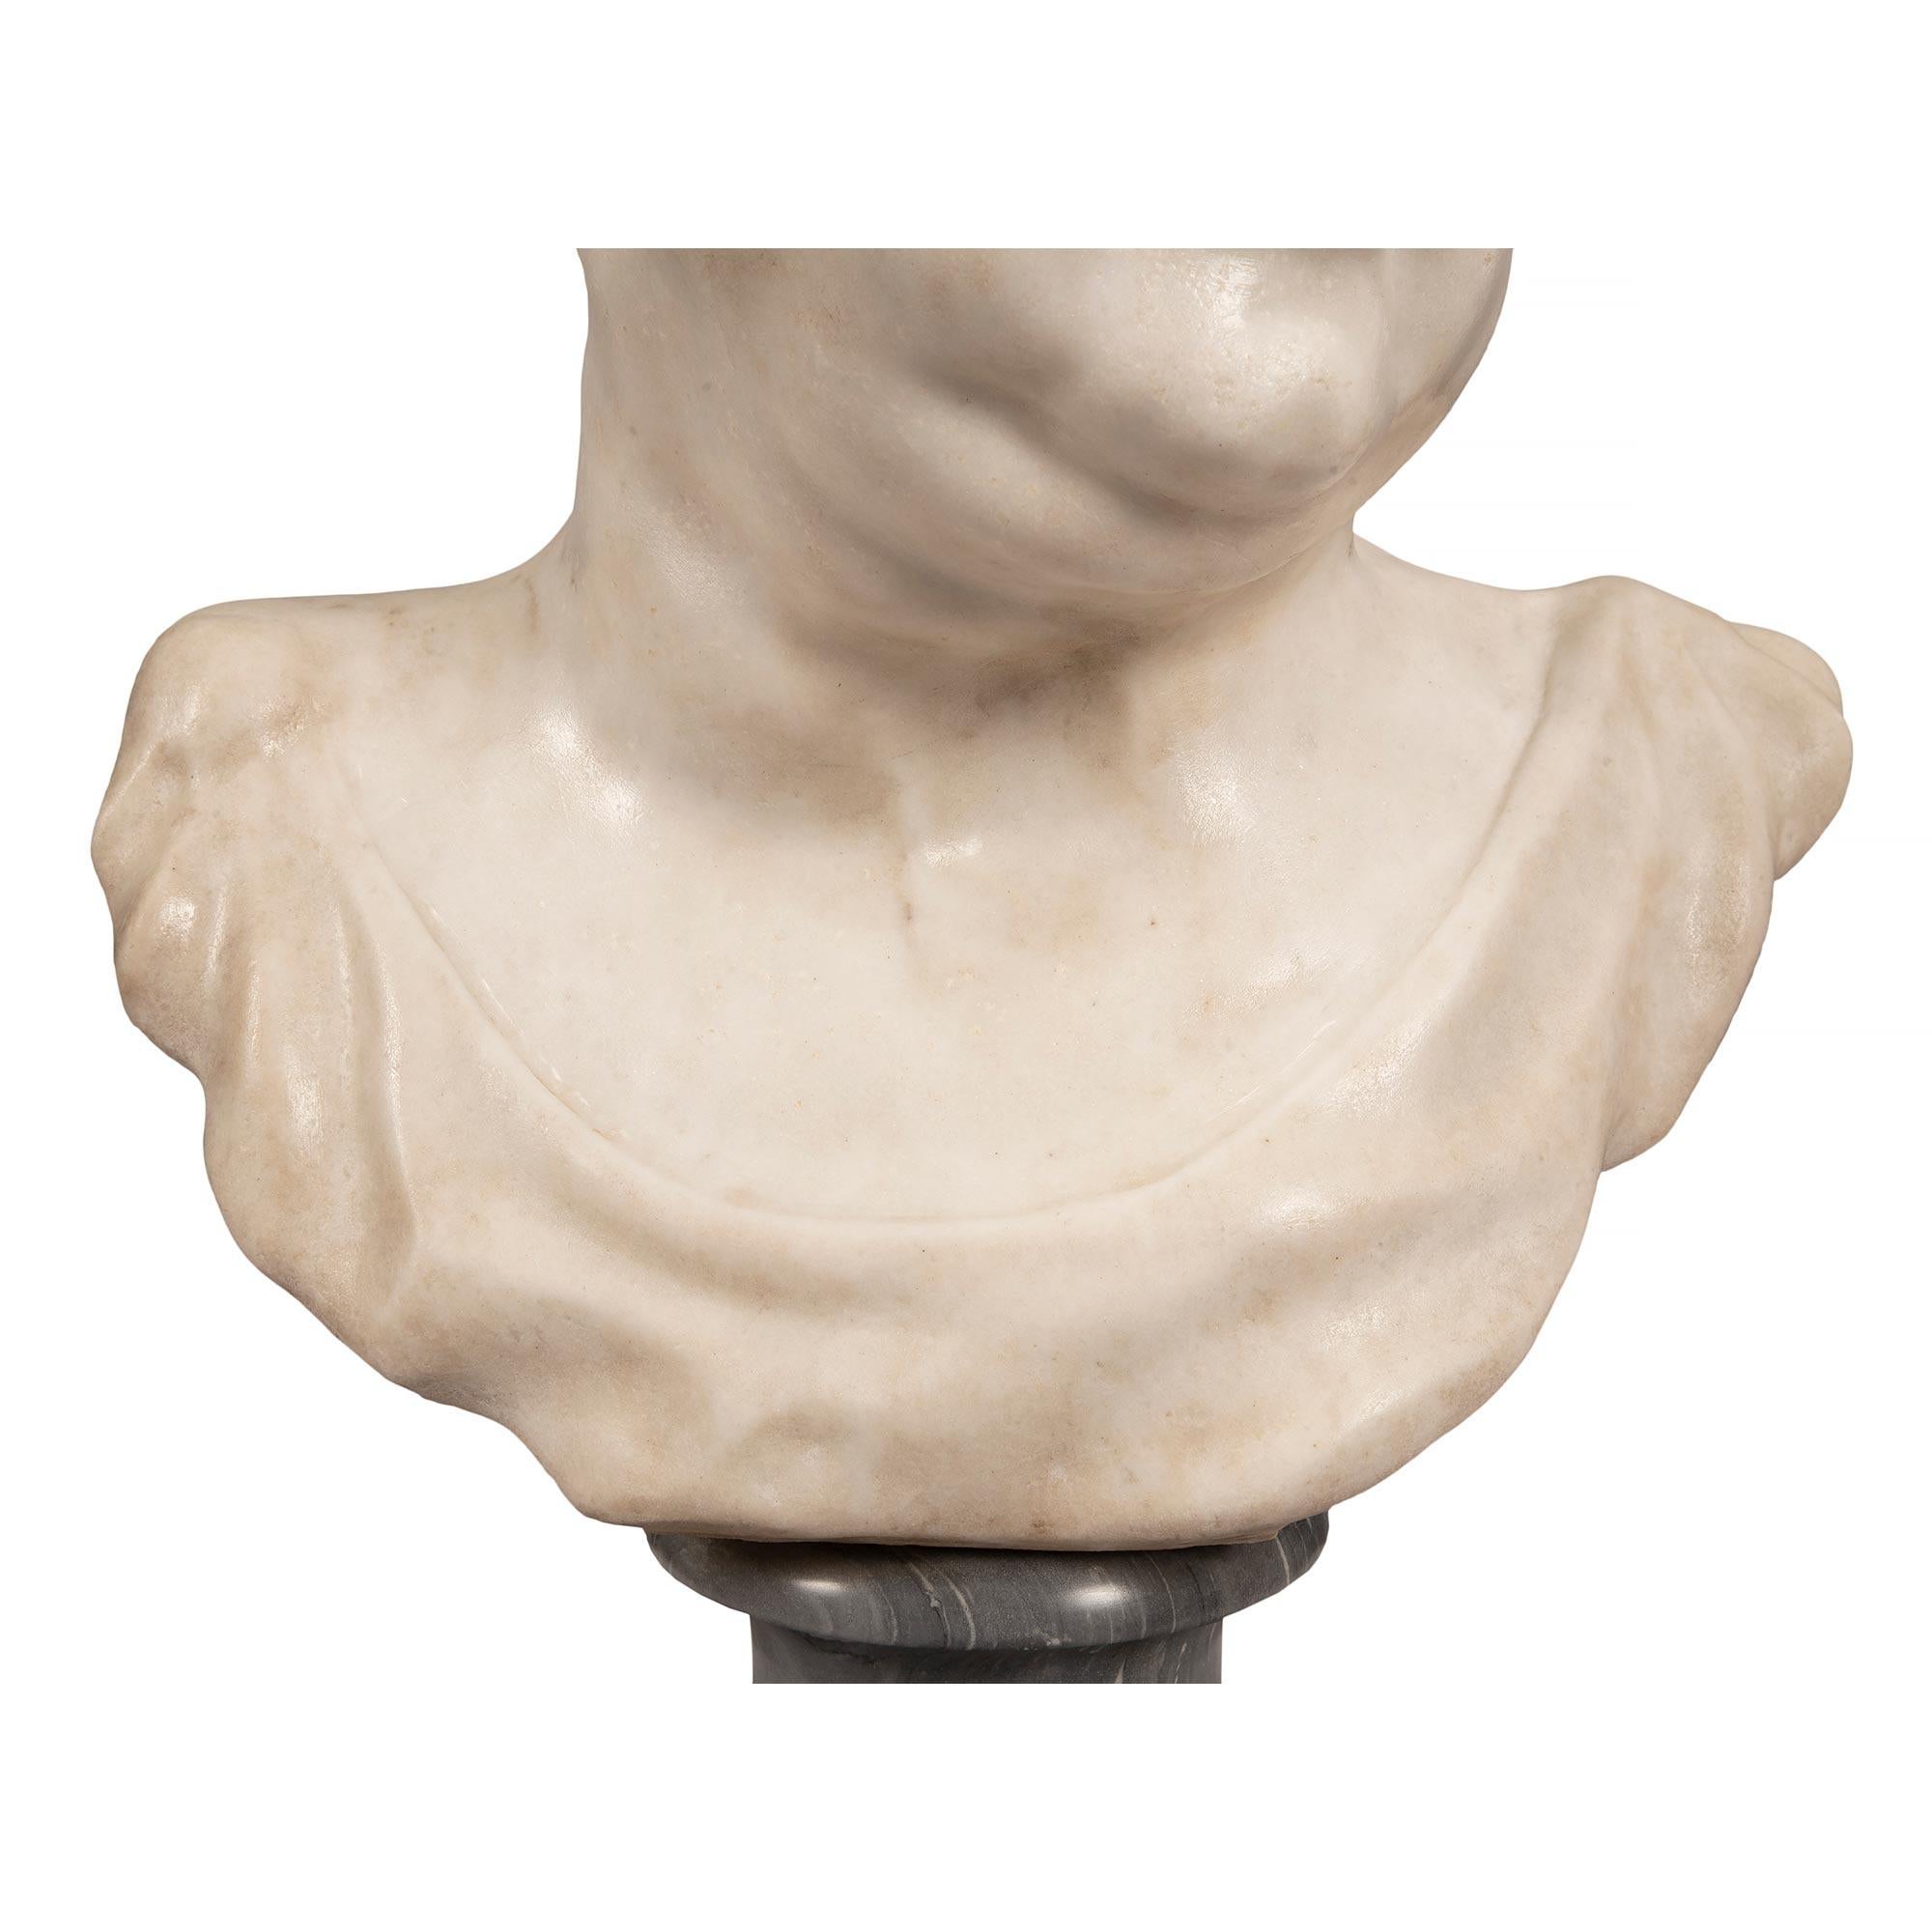 Italian Early 19th Century White Carrara Marble Bust of a Roman Emperor For Sale 6